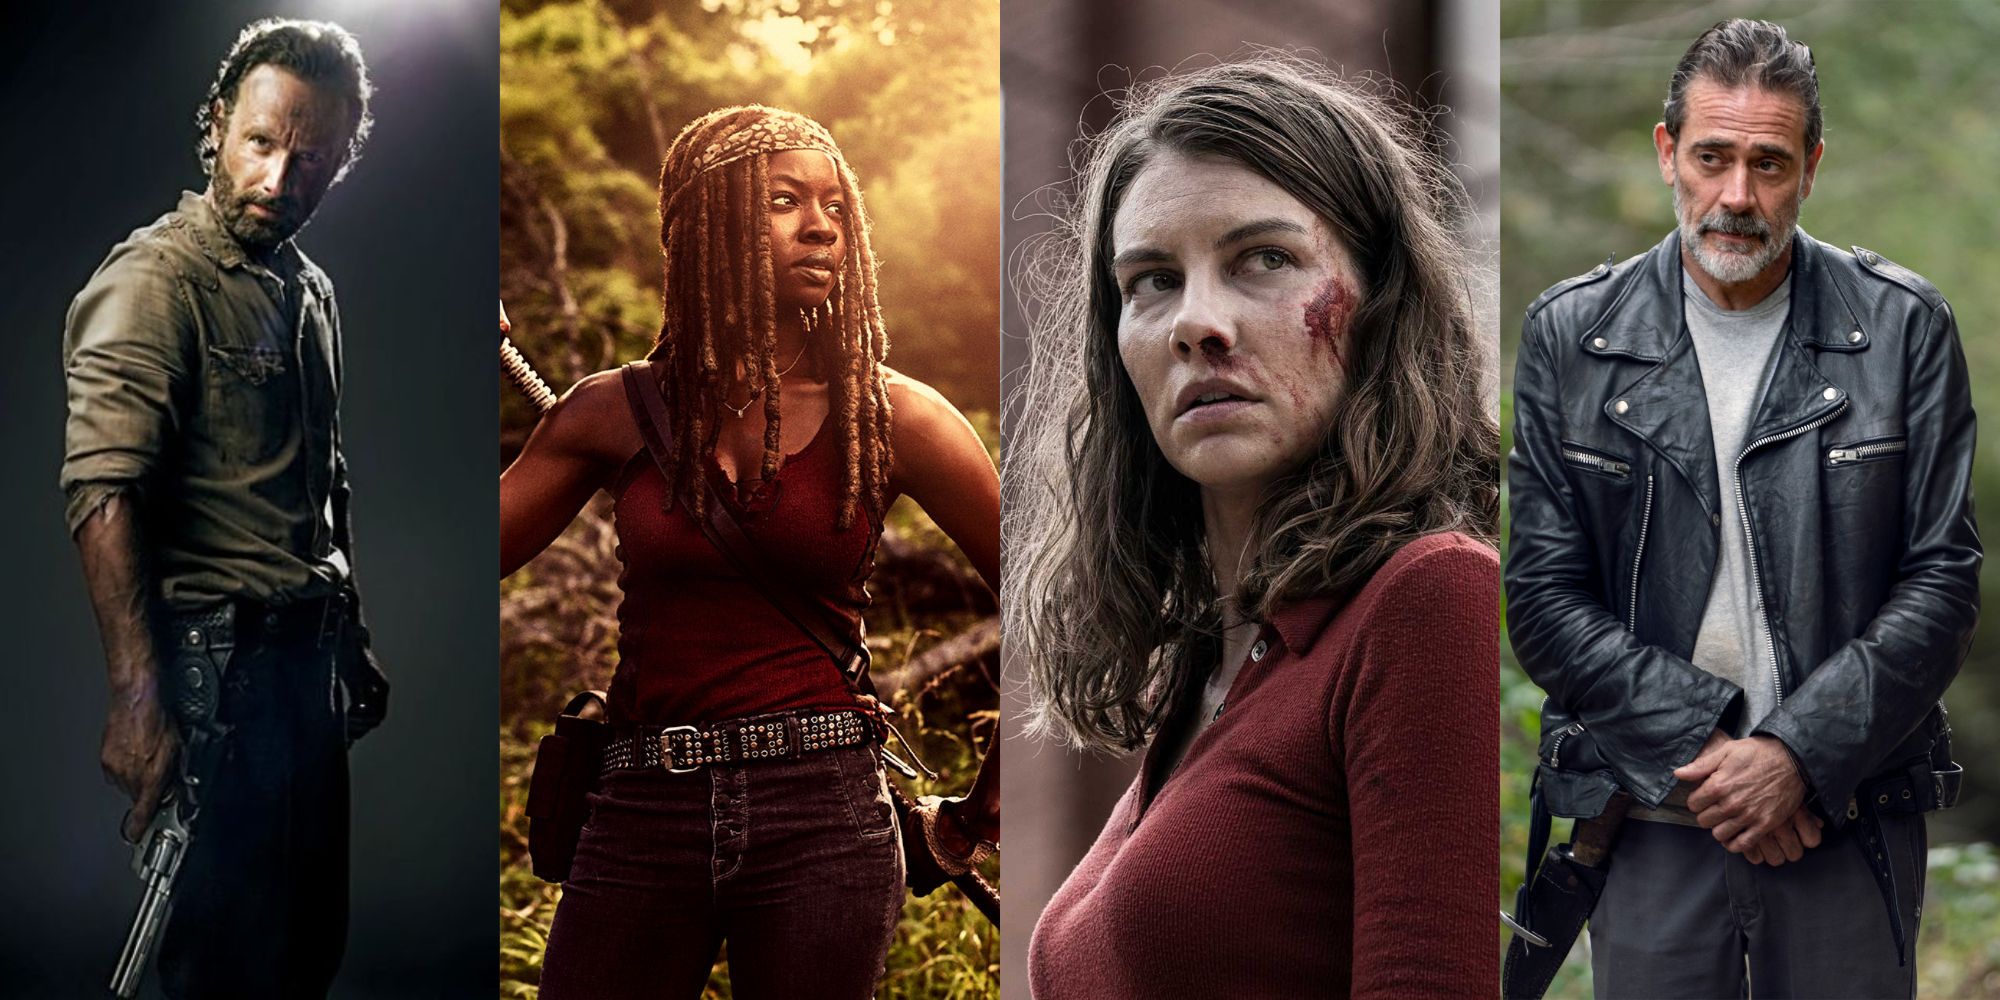 A split image of Rick, Michonne, Negan, and Maggie from The Walking Dead.